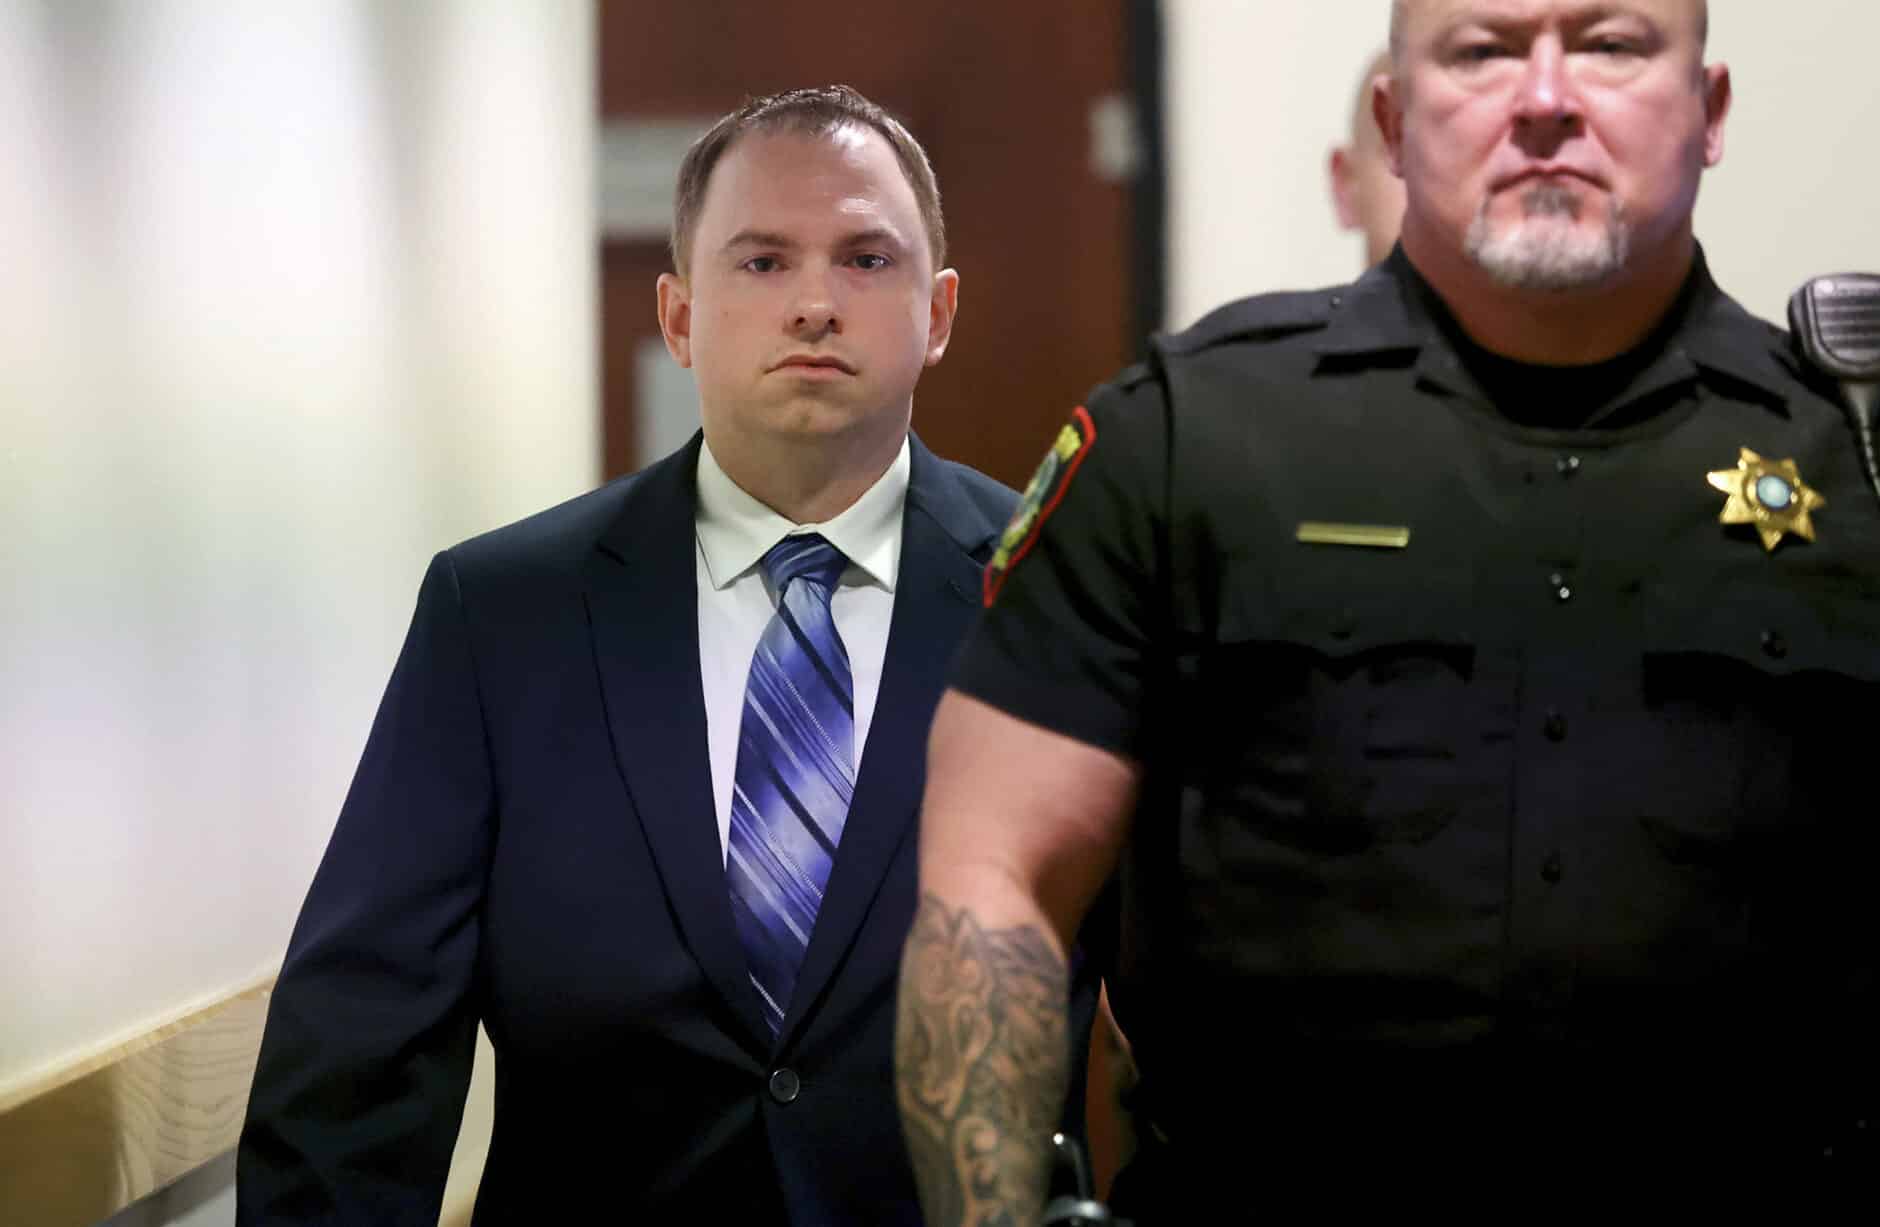 Texas jury begins deliberations in murder trial of ex cop who killed